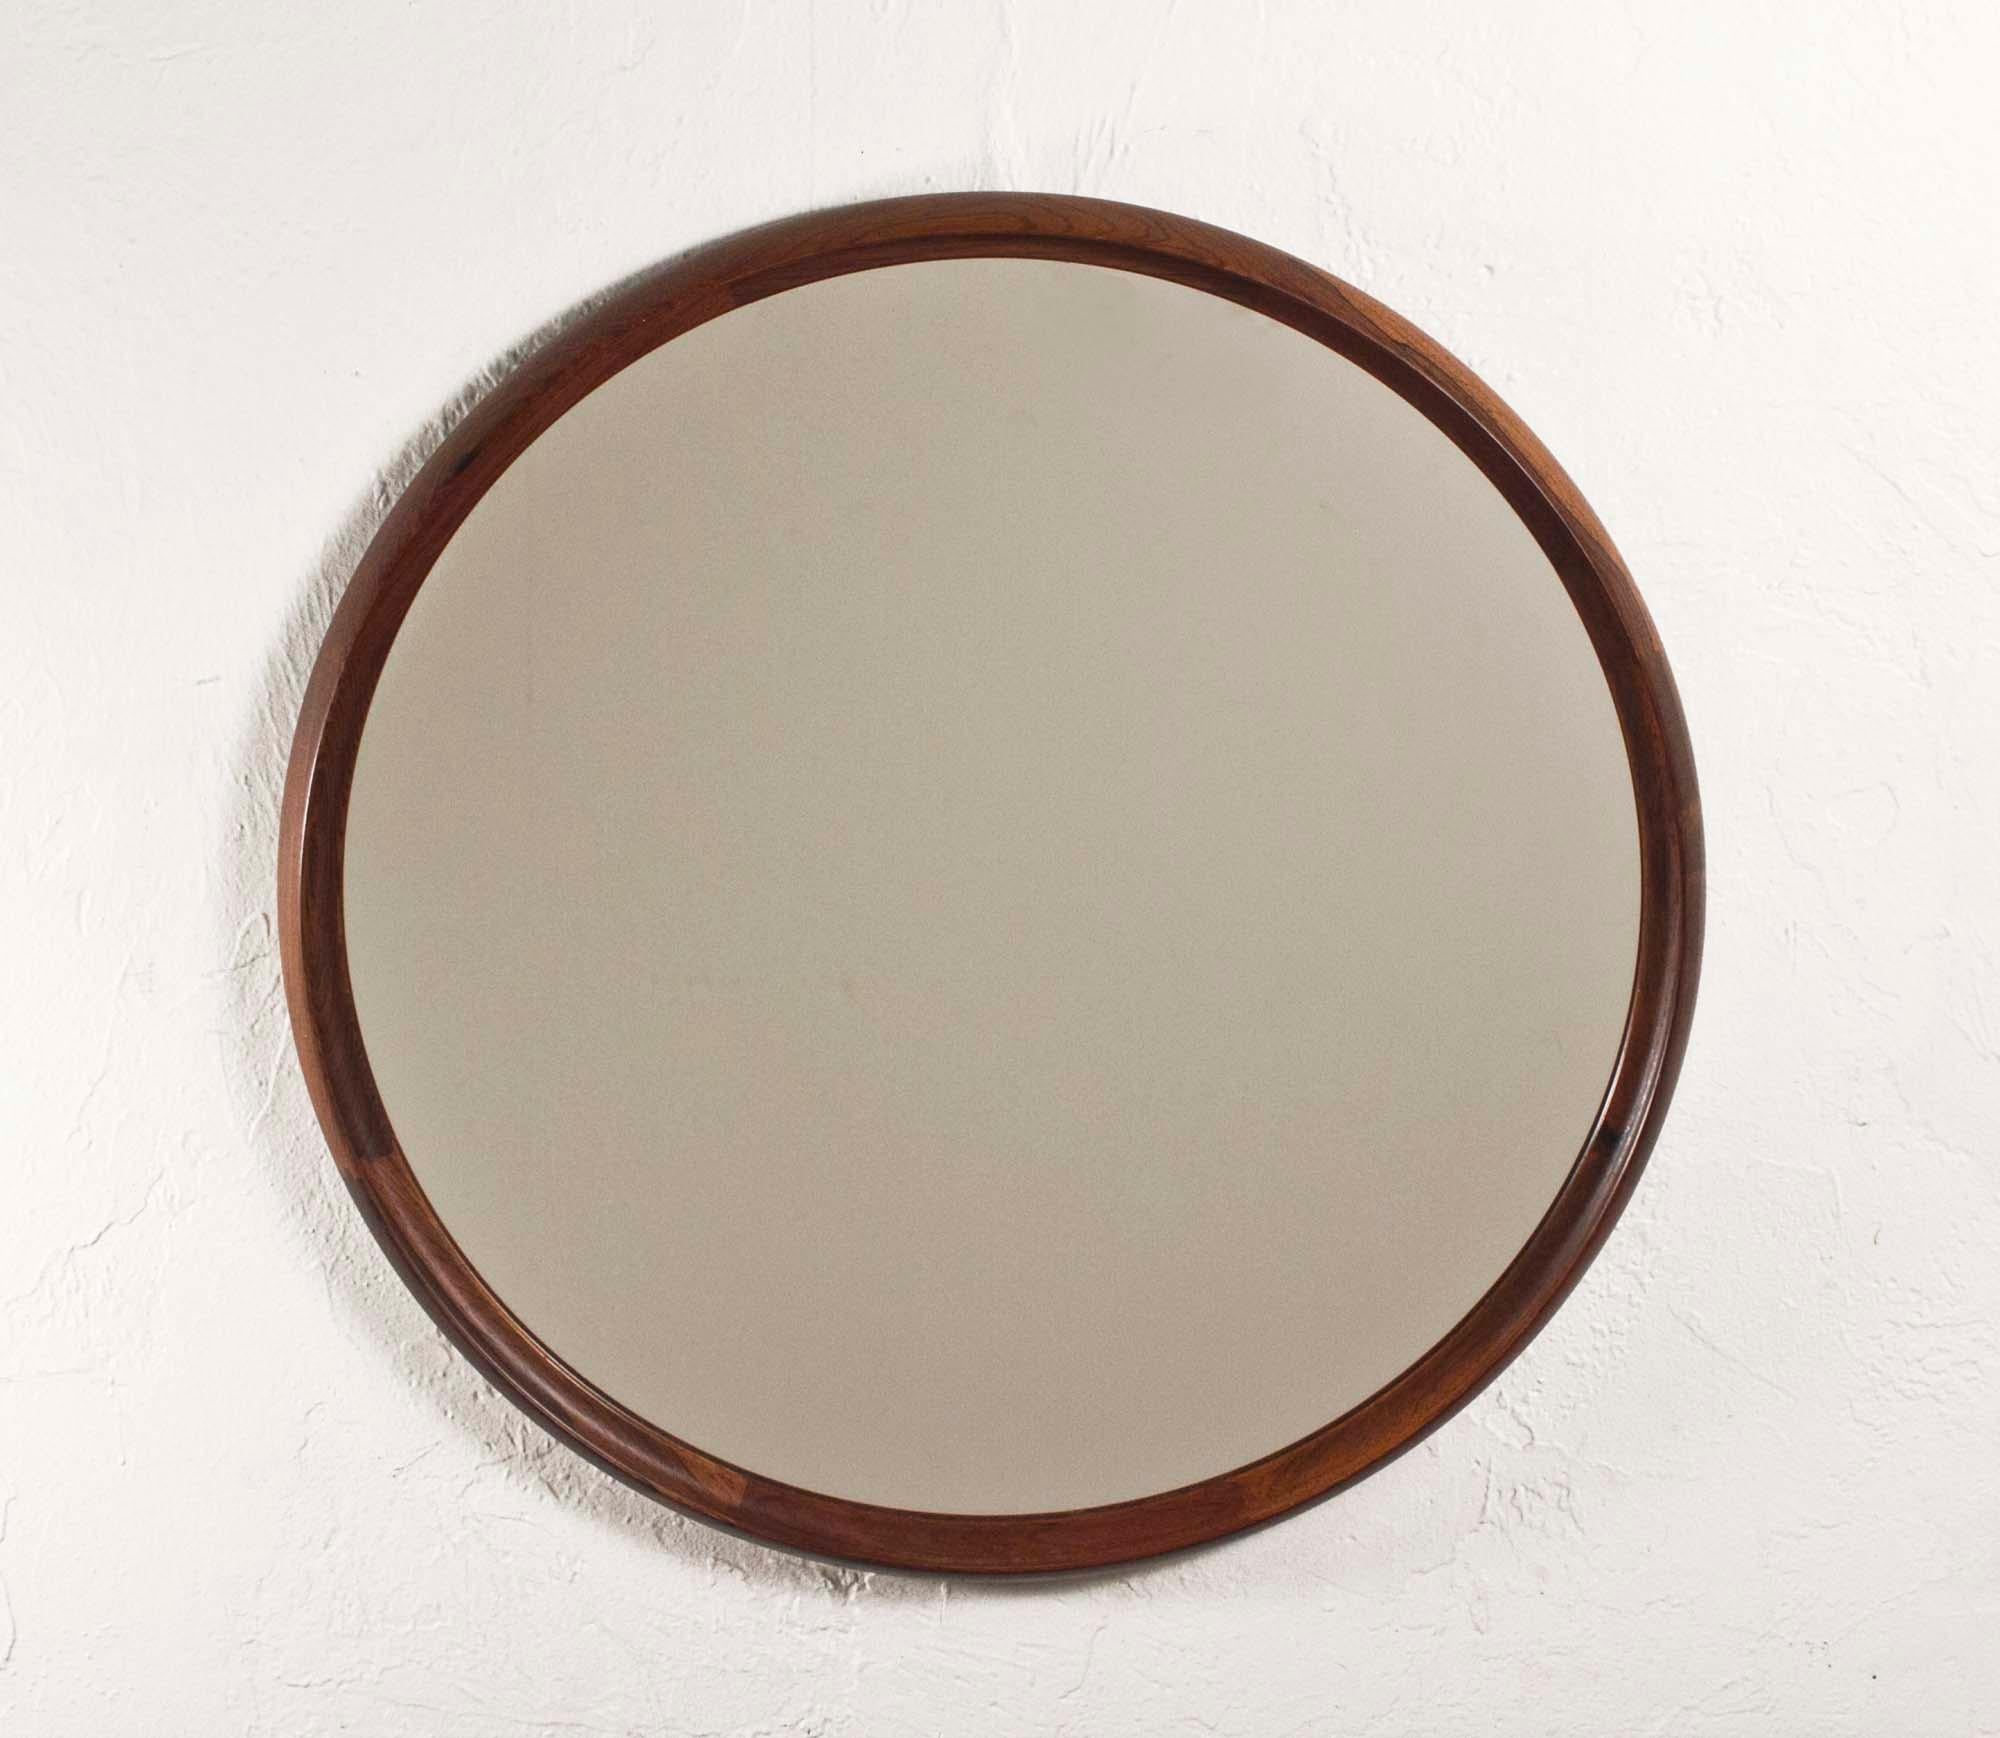 This stunning vintage round mirror if exquisitely framed in the most amazing rosewood grain. Made in Sweden in the 1960s this is fantastic piece for an entrance way or dining room. 

Frame is in excellent conditions with one slight imperfection in